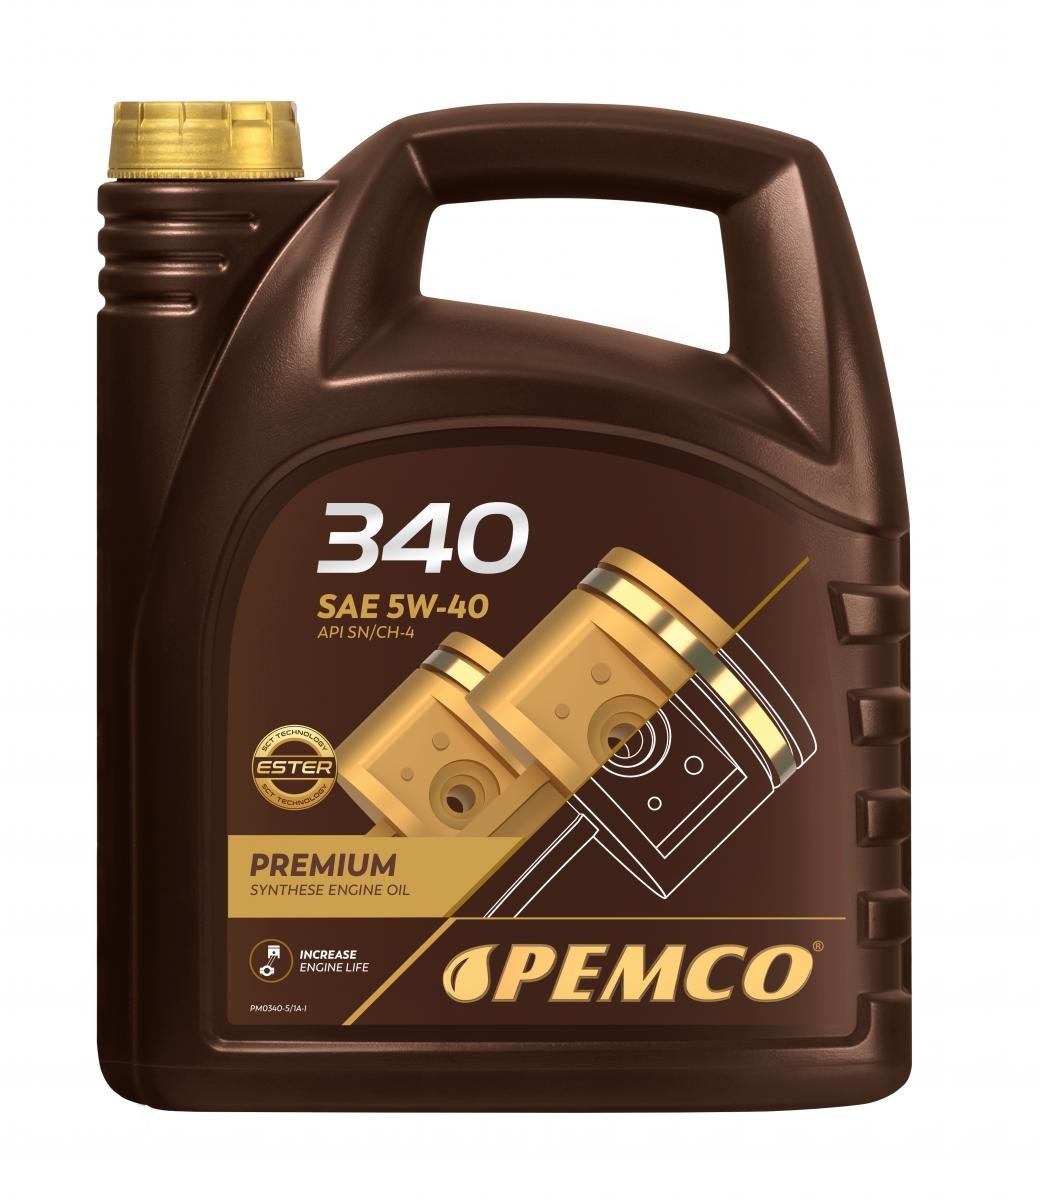 Citroën Engine oil PEMCO PM0340-5 at a good price